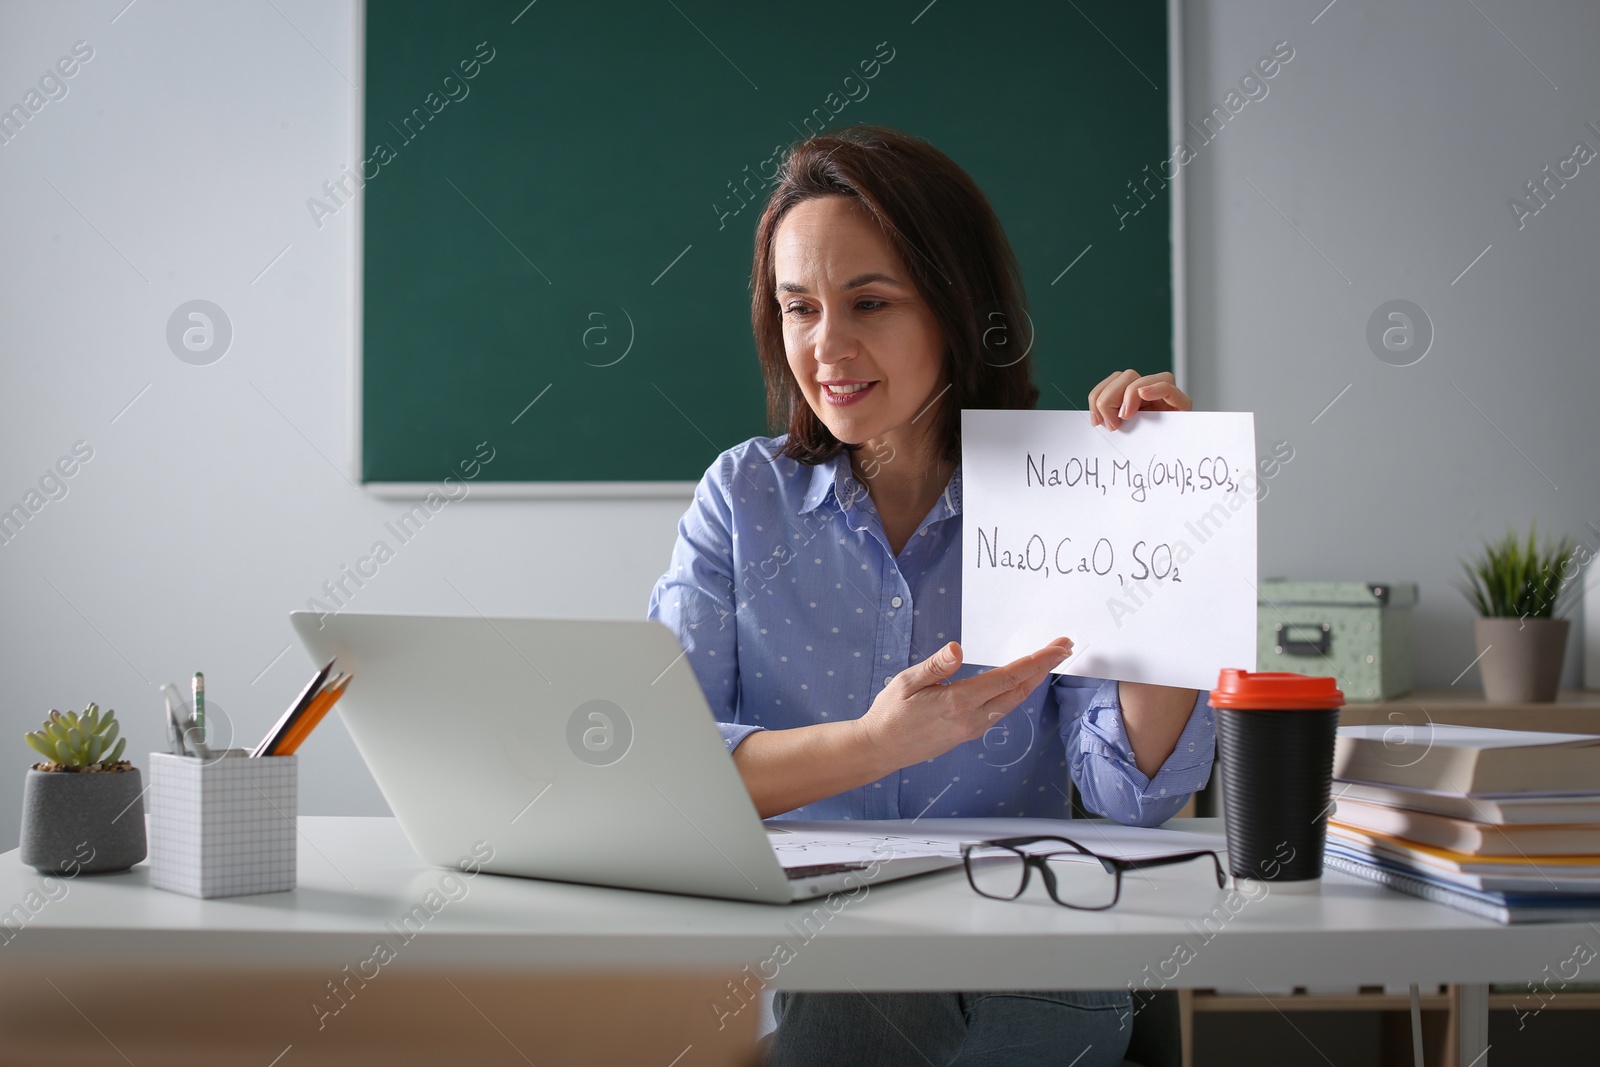 Photo of Teacher conducting online lesson in classroom during COVID-19 quarantine